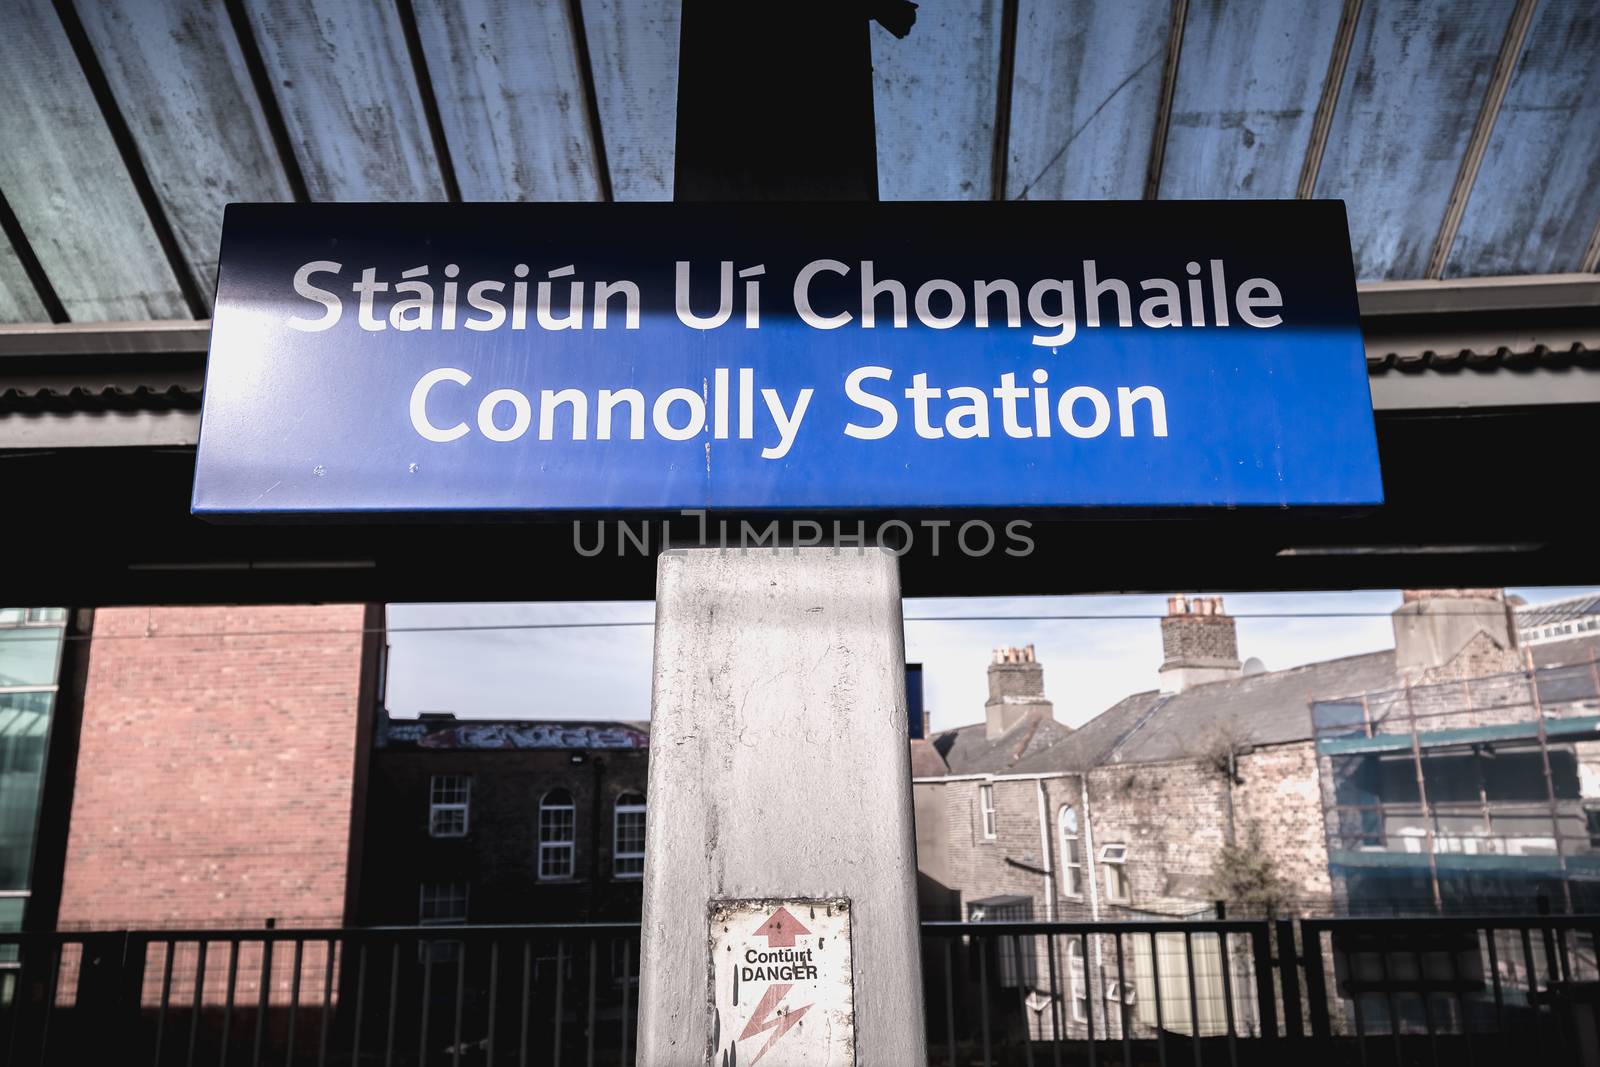 Dublin, Ireland - February 15, 2019: Blue platform sign announcing the name of the station in the Connolly DART train station (Staisiun ui Chonghaile) on a winter day